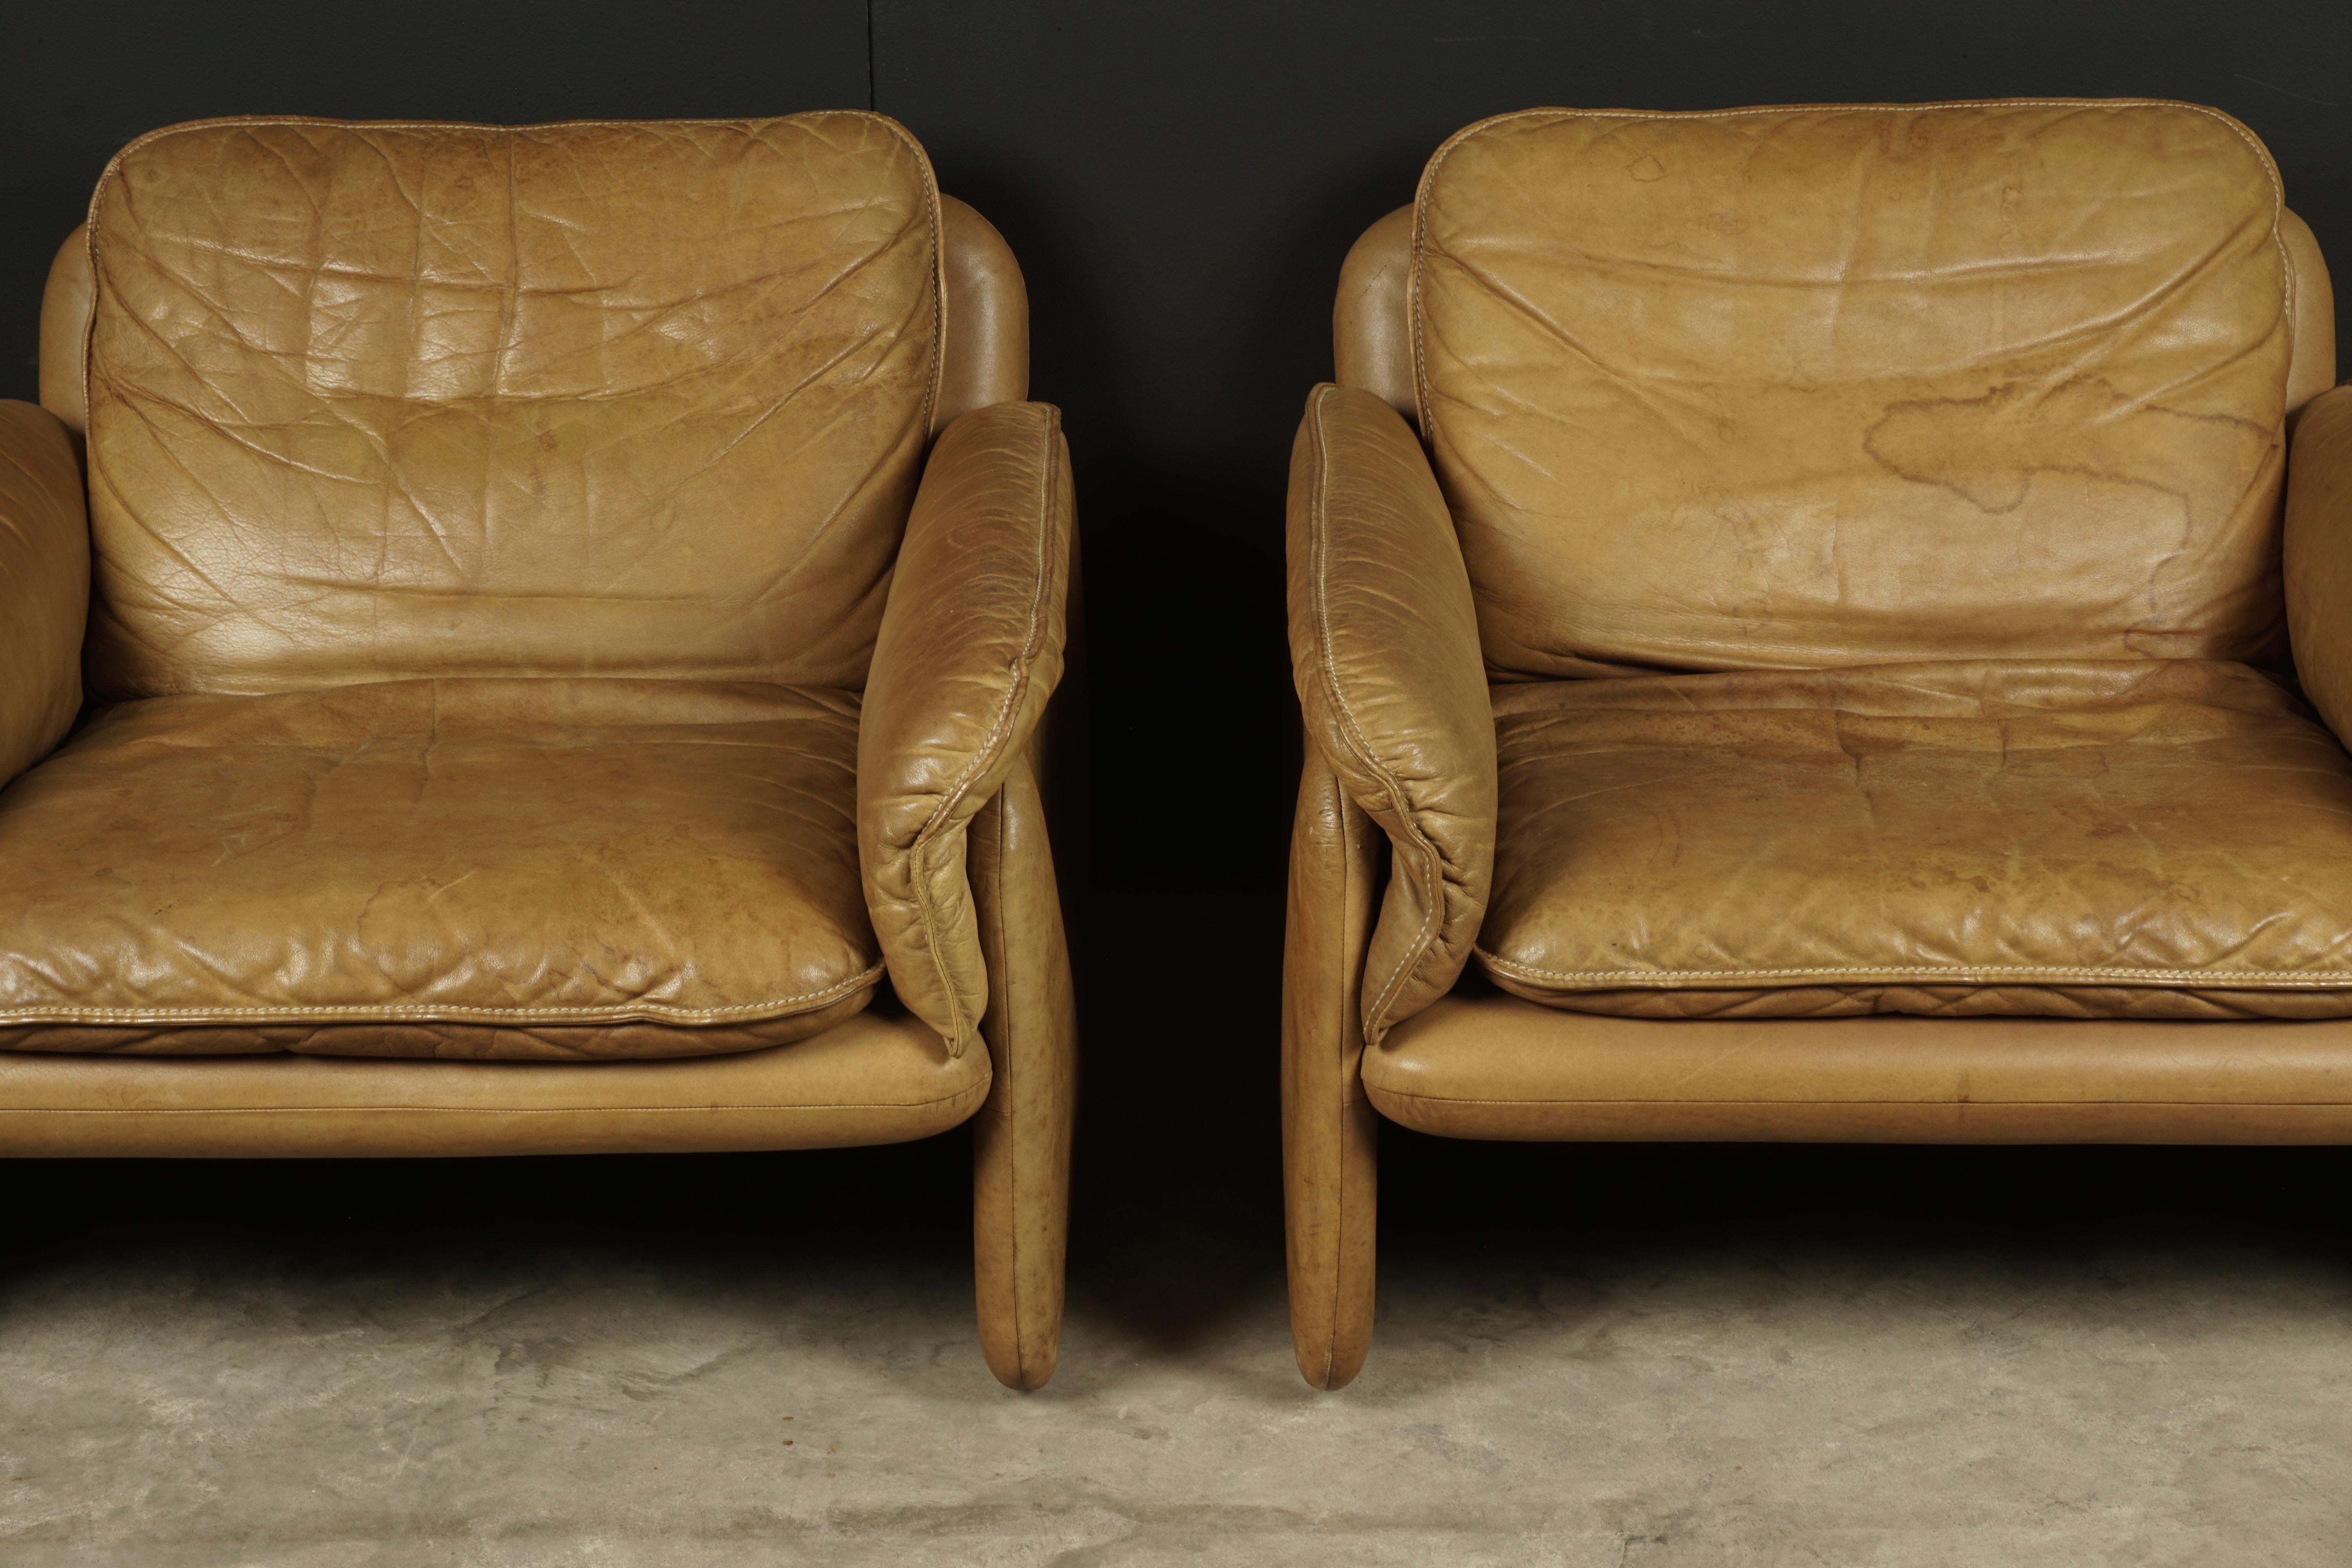 European Vintage Pair of Leather DS61 De Sede Lounge Chairs, from Switzerland, circa 1980